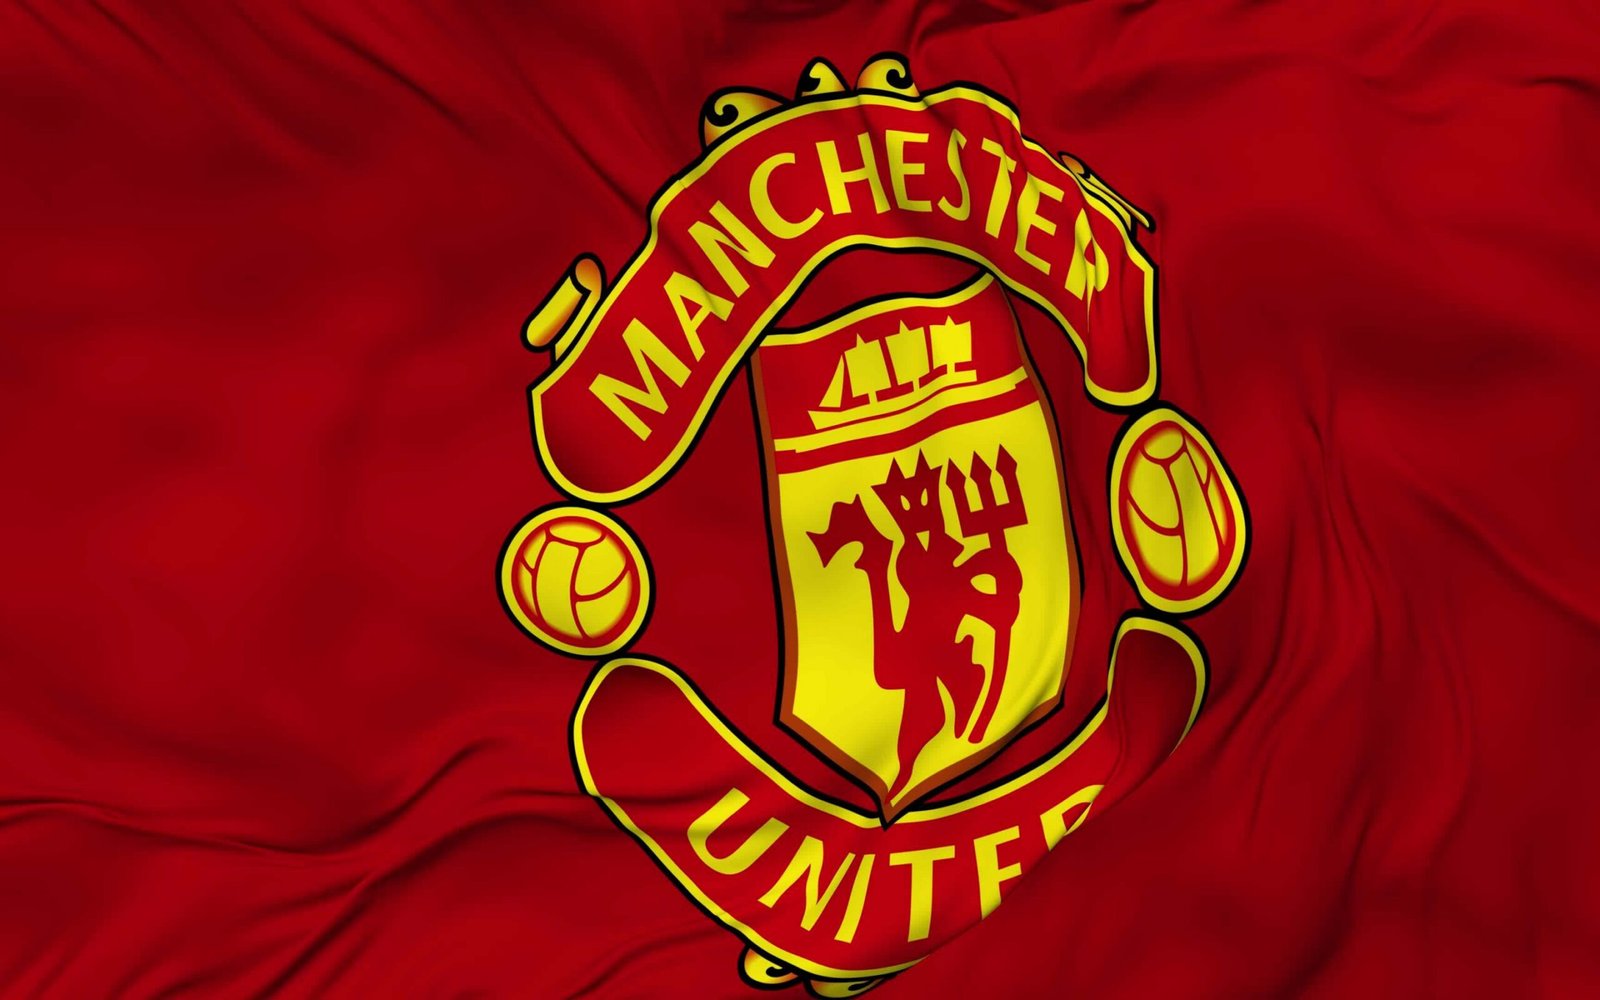 Breaking News: Manchester United will sign two "sensational" players from Bayern Munich